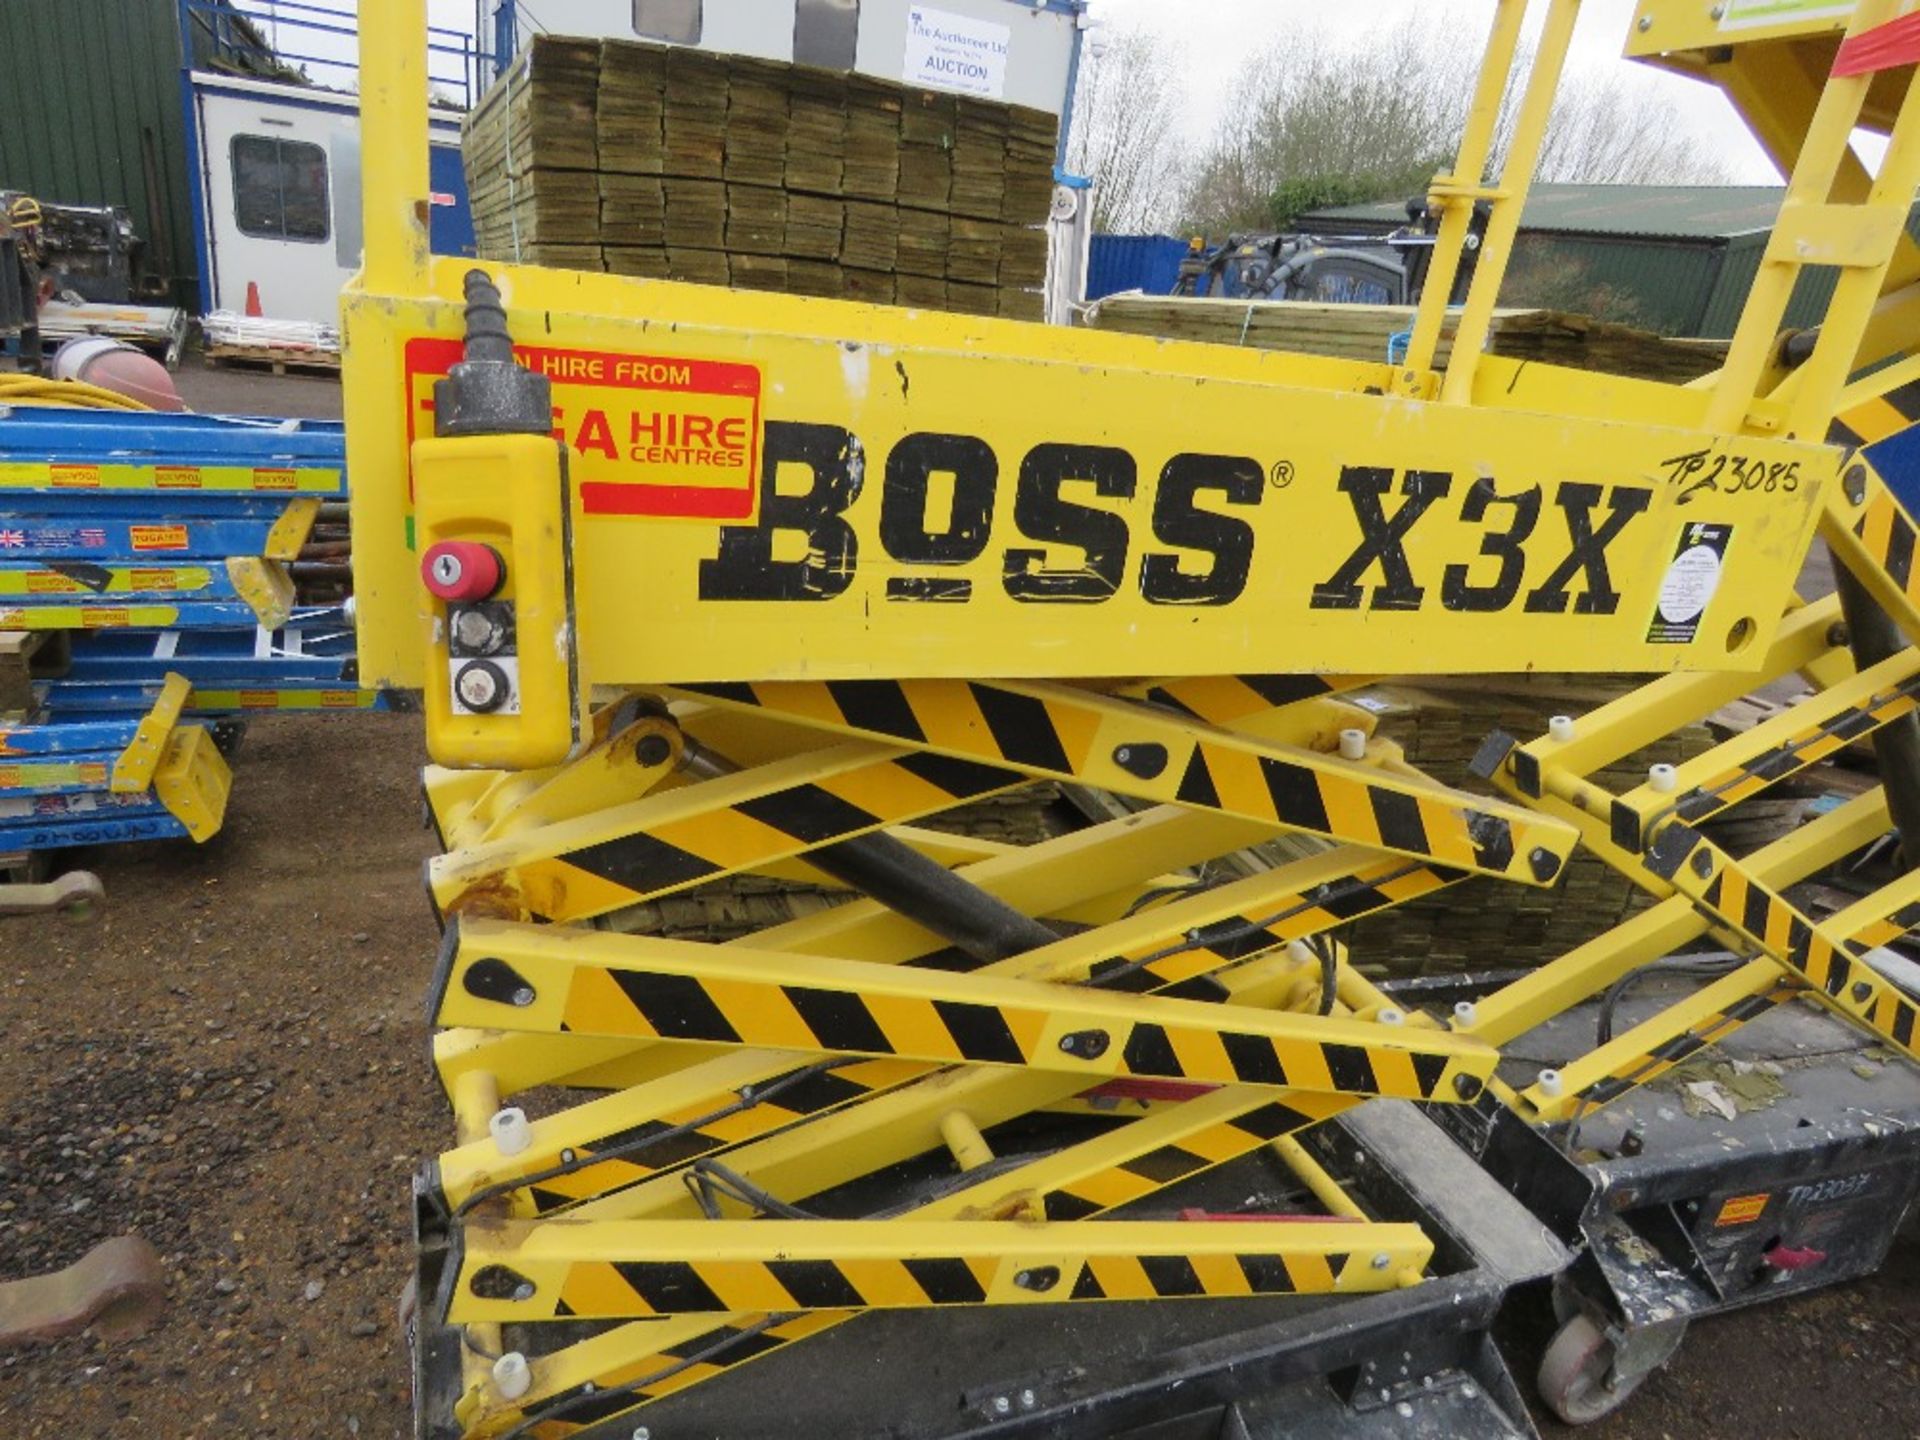 BOSS X3X BATTERY POWERED SCISSOR LIFT UNIT, YEAR 2019. WHEN TESTED PUMP WAS SEEN TO PUMP AND WAS SEE - Image 6 of 7